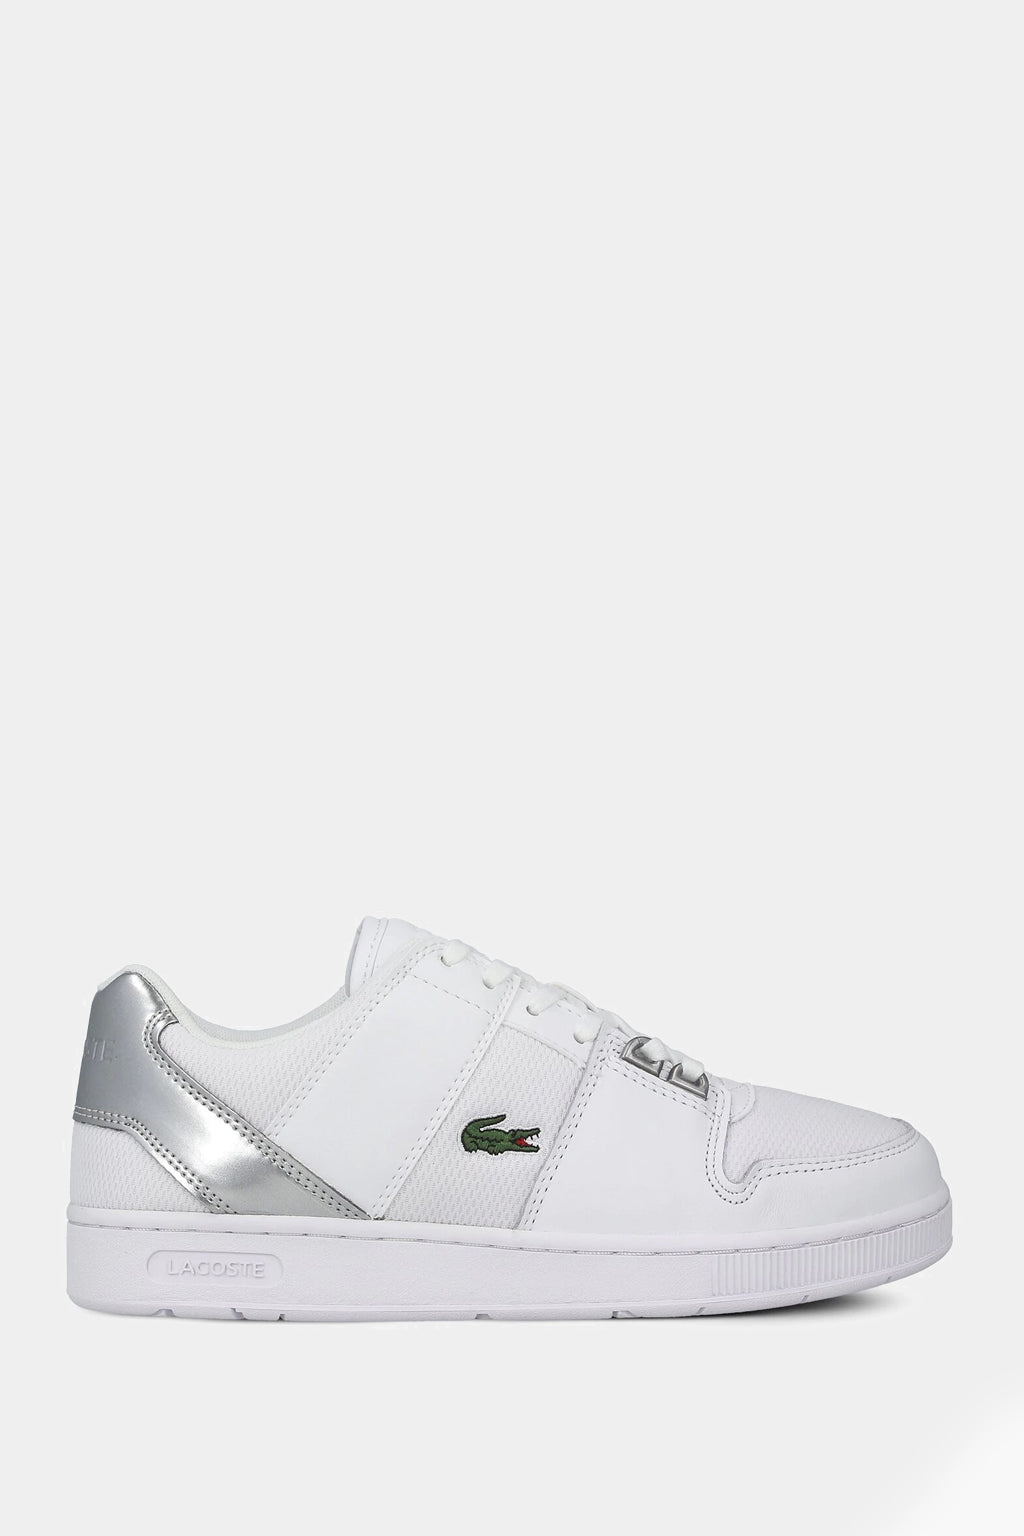 Lacoste - Lacoste Thrill 220 1 Sfa Shoes